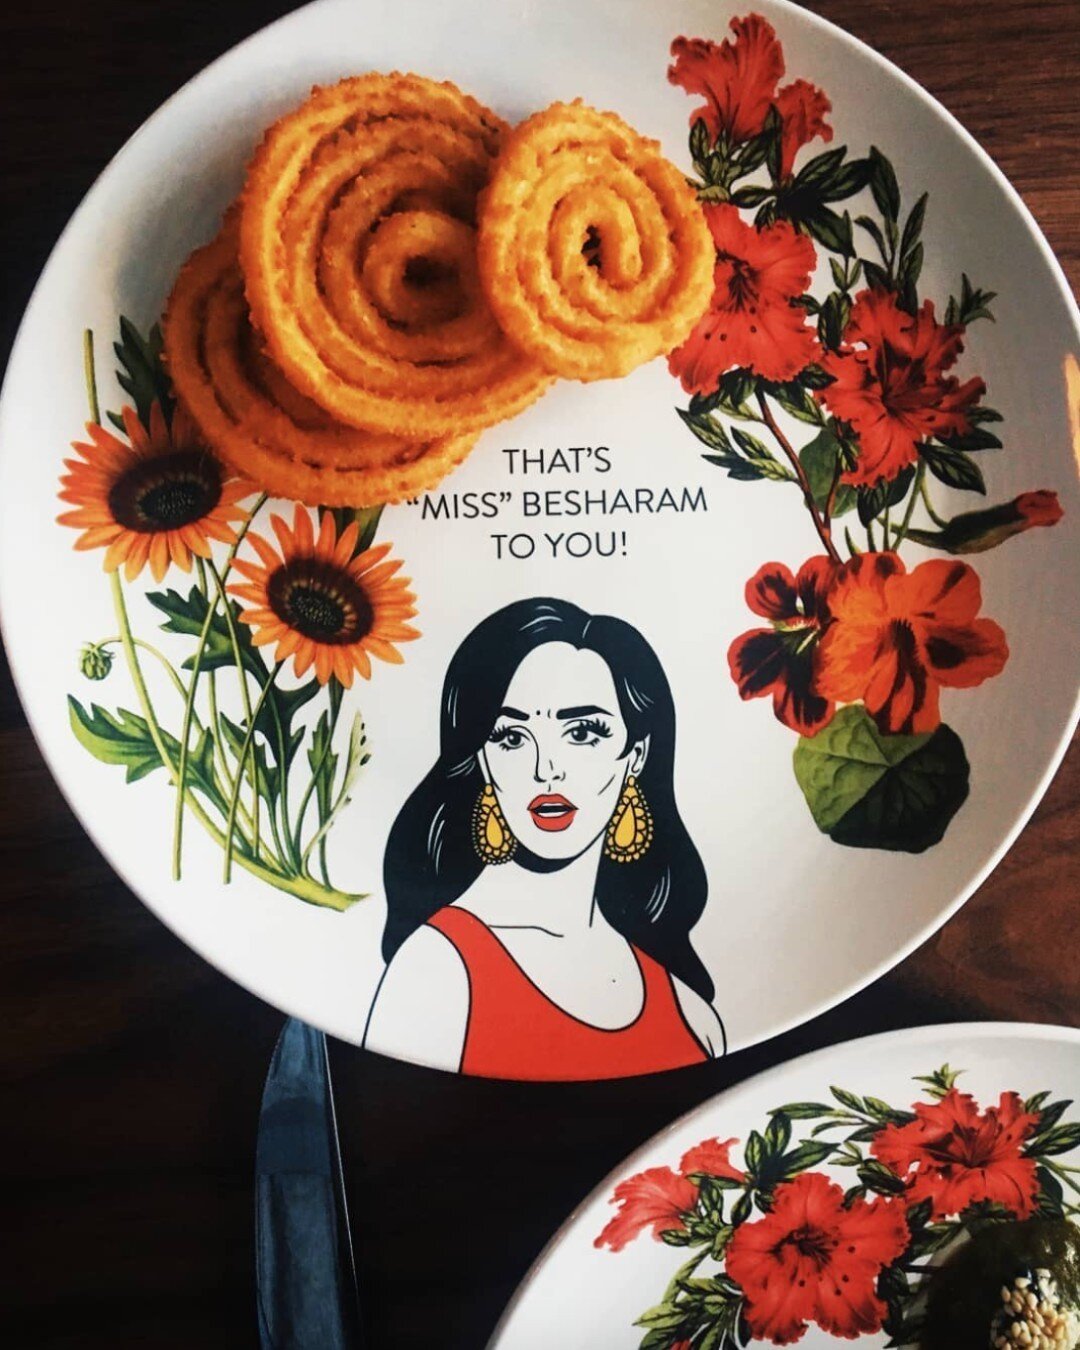 The inauguration of Auntie is a day away and we&rsquo;re already feeling the besharam (shameless) energy high key 🌻

🌶 Besharam pride 
🌶 Besharam ambition
🌶 Besharam in our success 

✨✨✨

Art + vibe by @hatecopy, in collaboration with @besharamsf